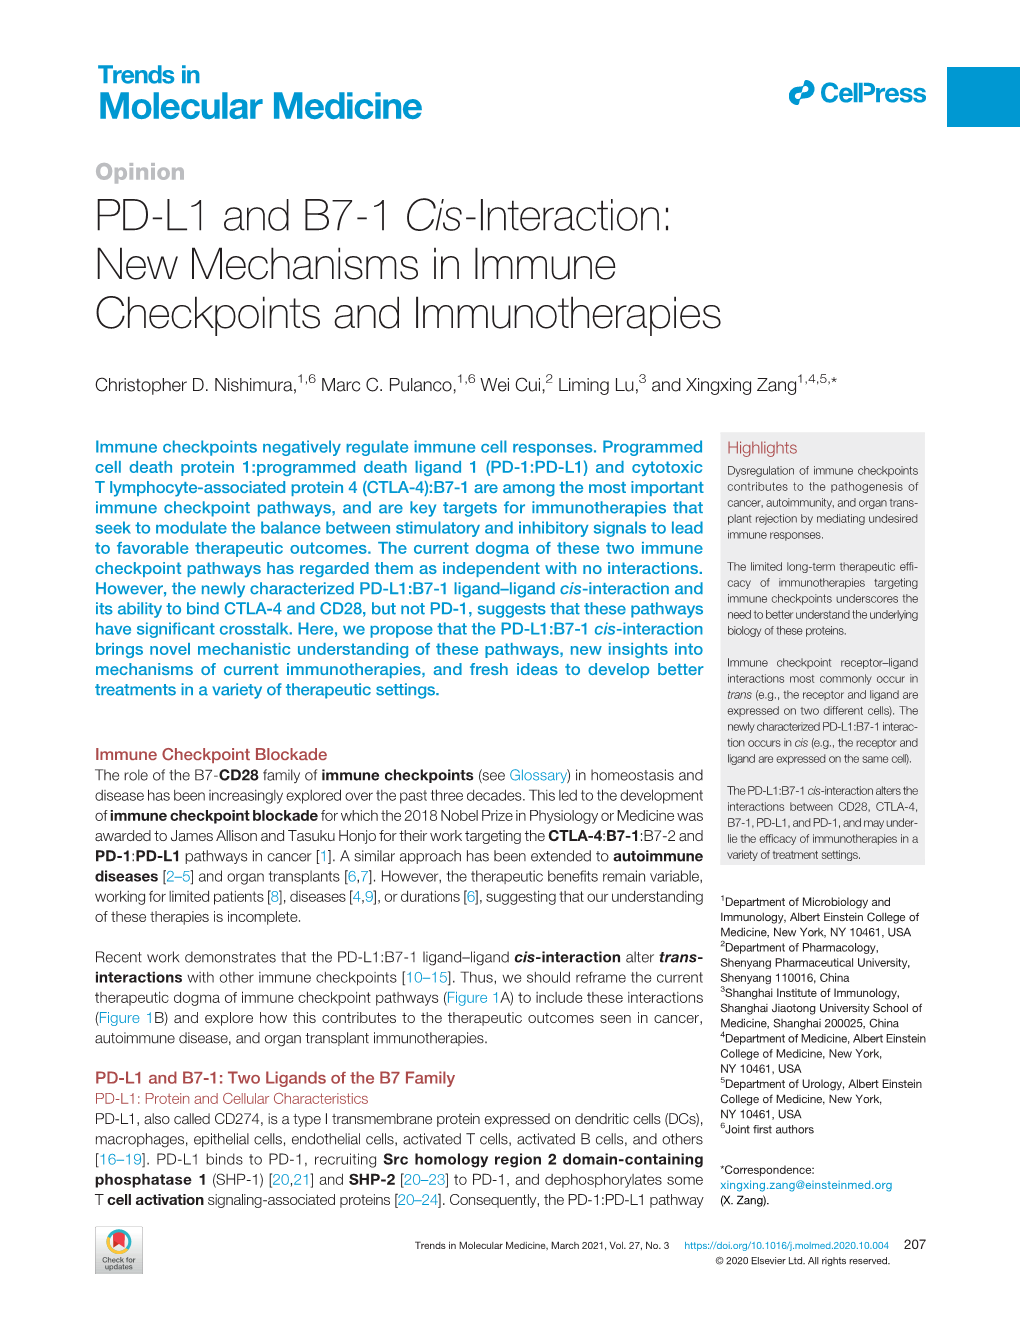 PD-L1 and B7-1 Cis-Interaction: New Mechanisms in Immune Checkpoints and Immunotherapies